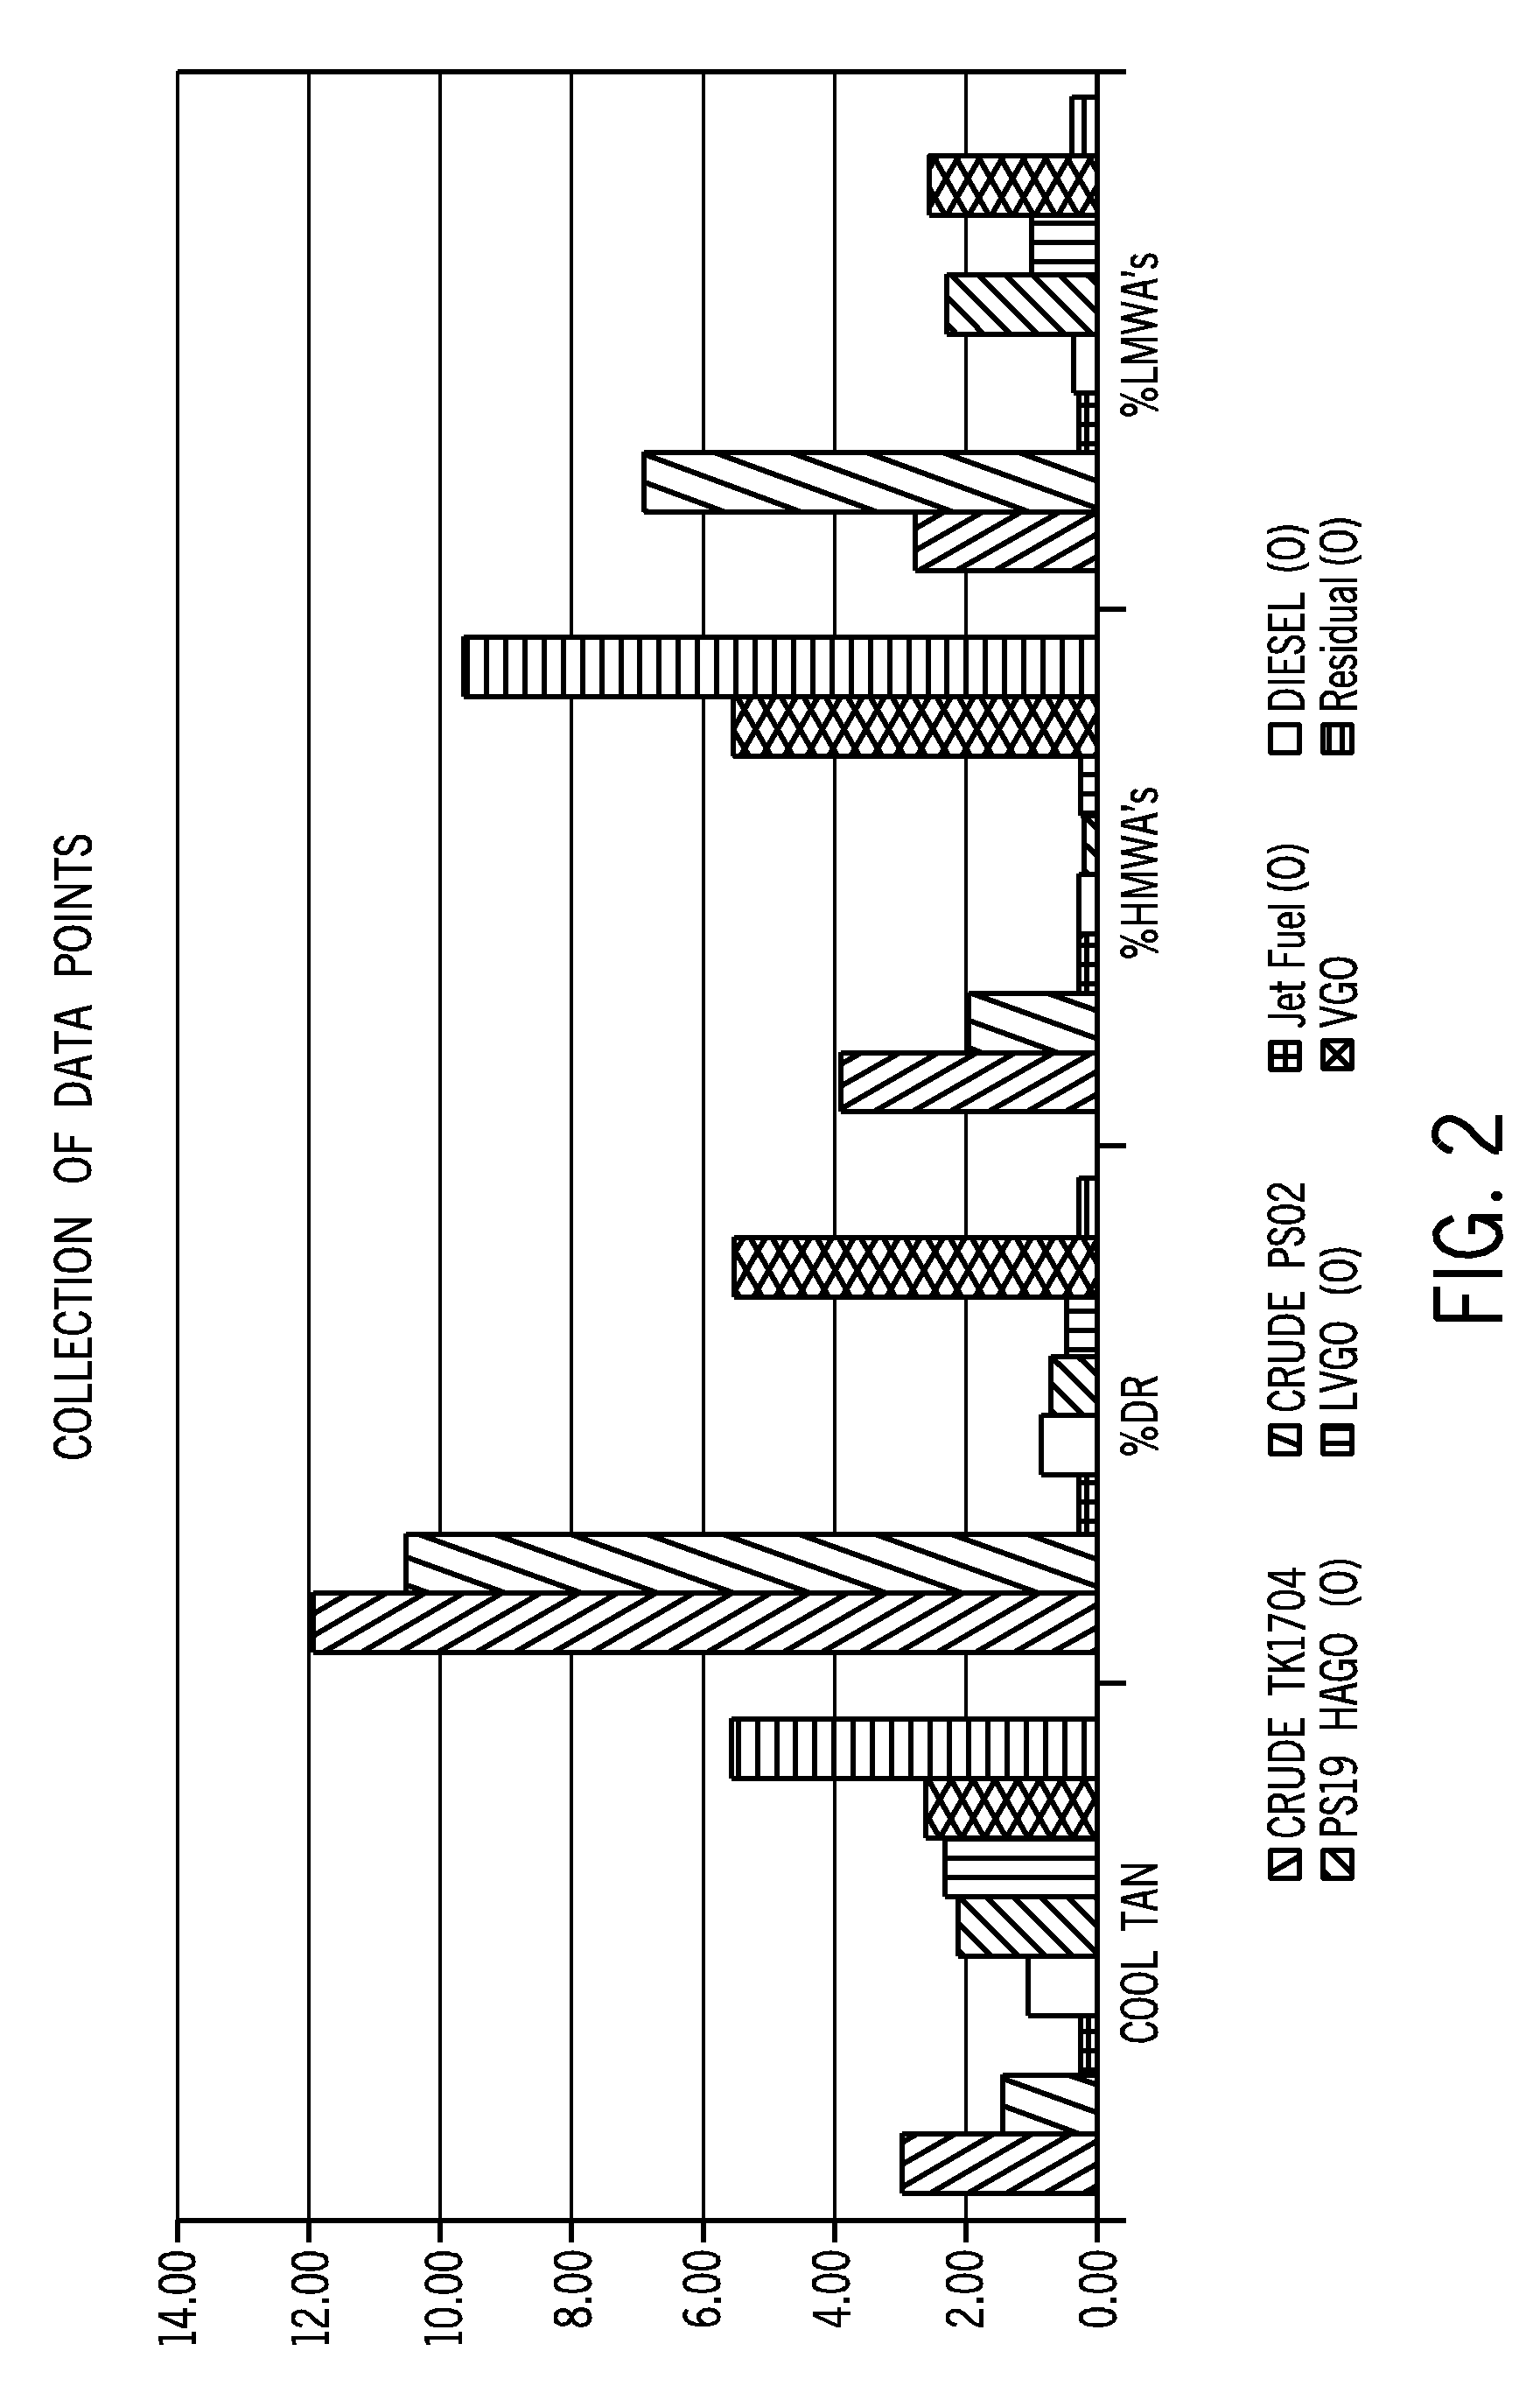 Method of Screening Crude Oil for Low Molecular Weight Naphthenic Acids